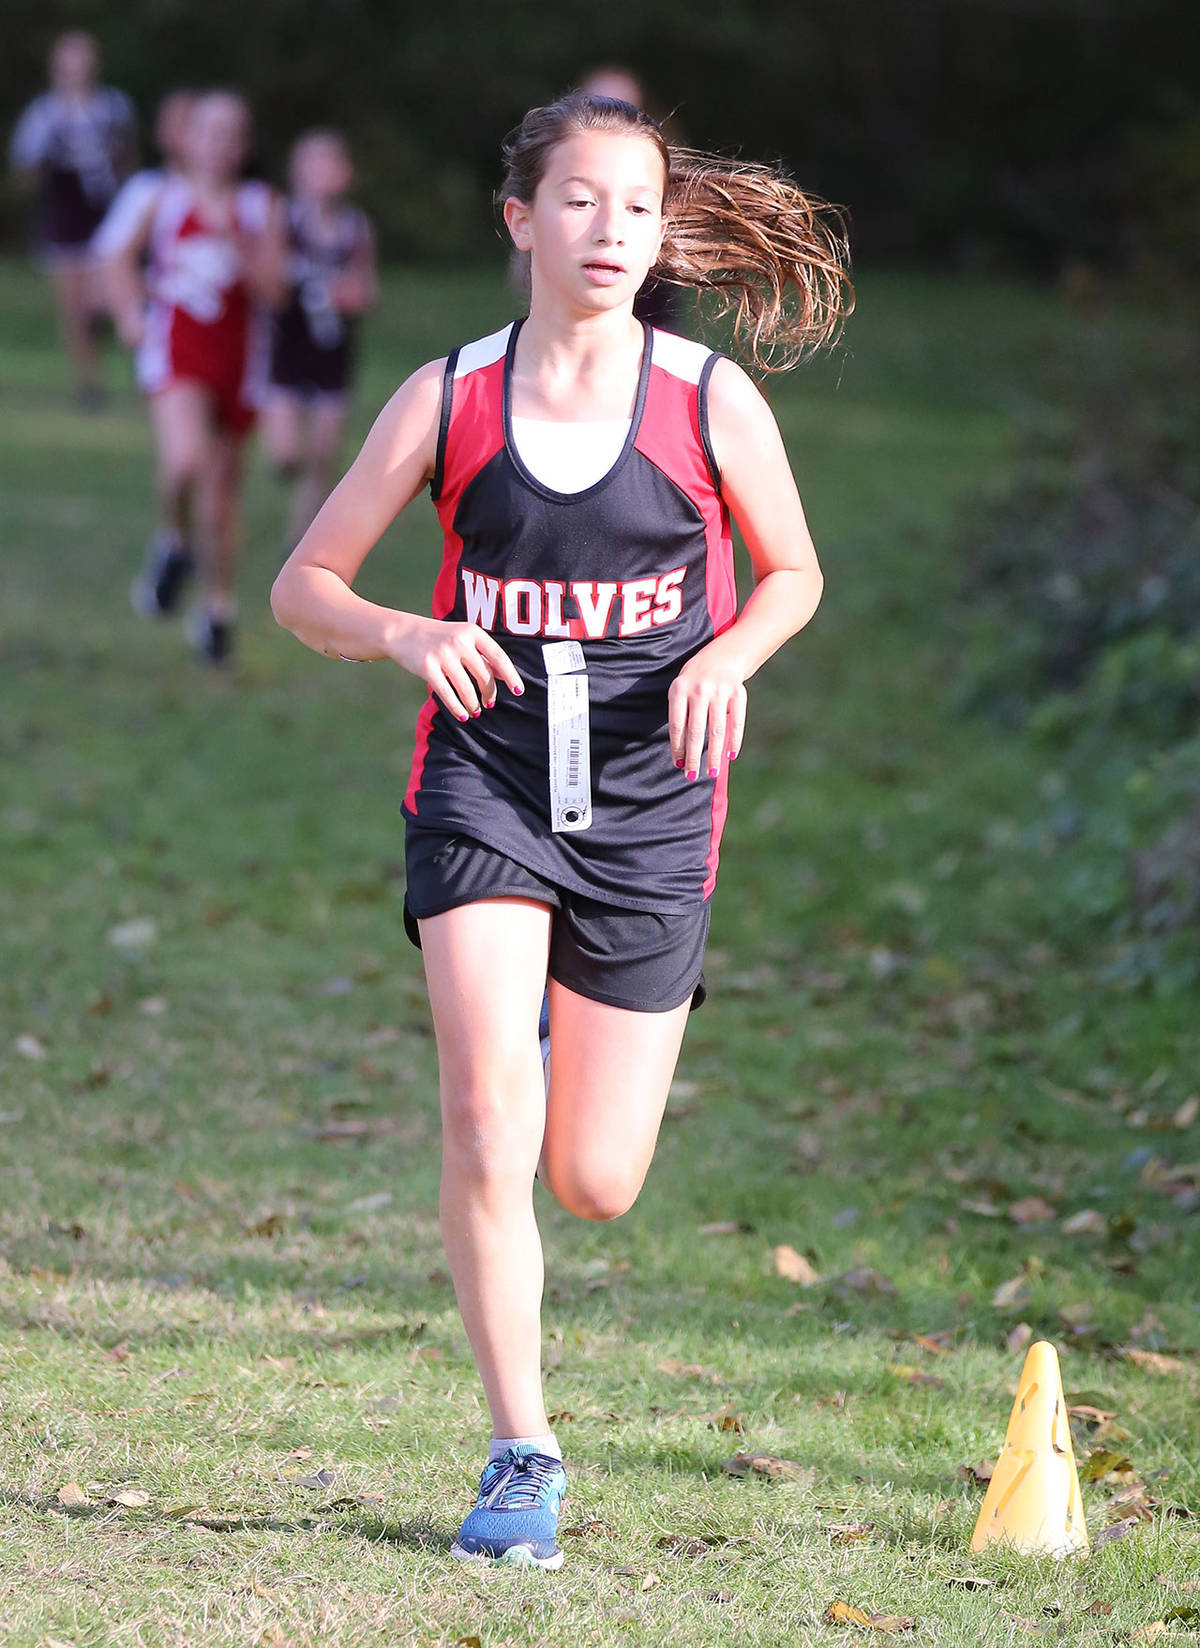 Ayden Wyman paced the Coupeville girls by taking 16th in the middle school league championship race. (Photo by John Fisken)